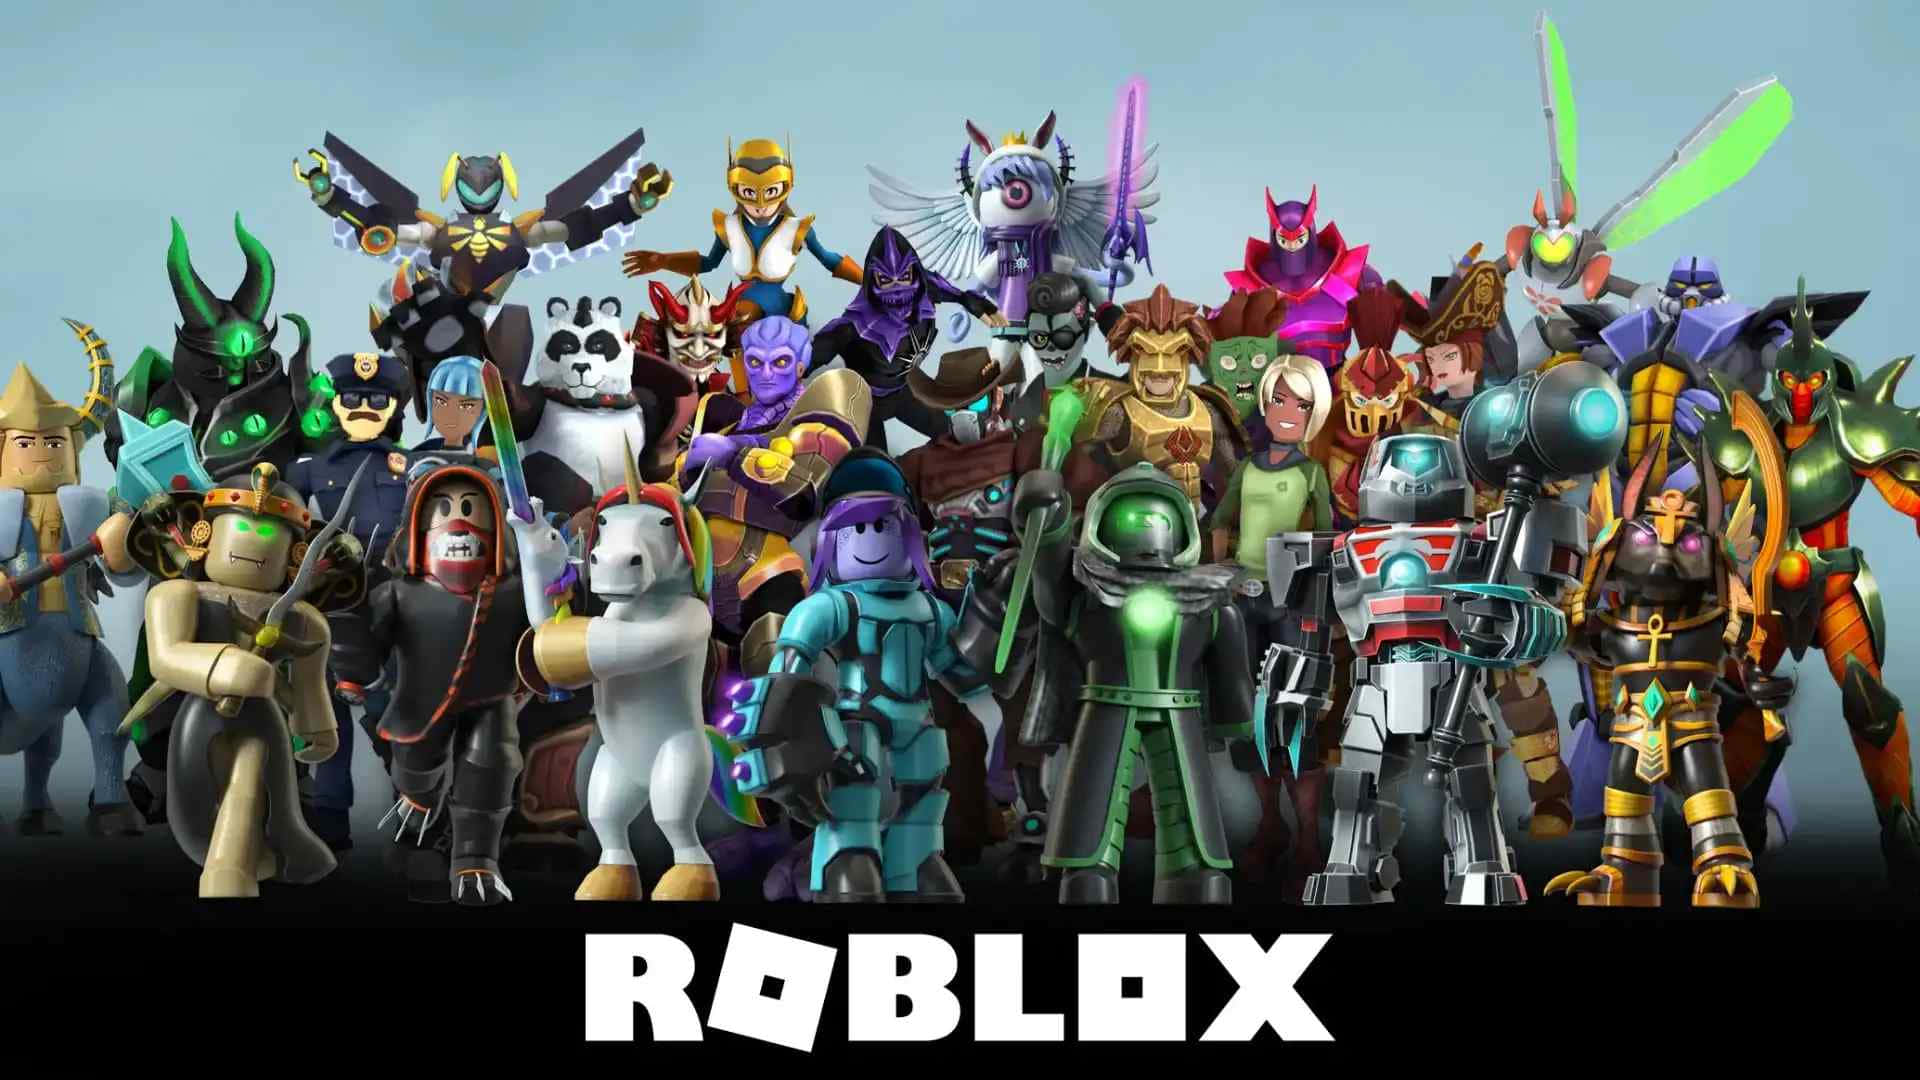 Customize your Roblox Avatar and Explore Fun Worlds